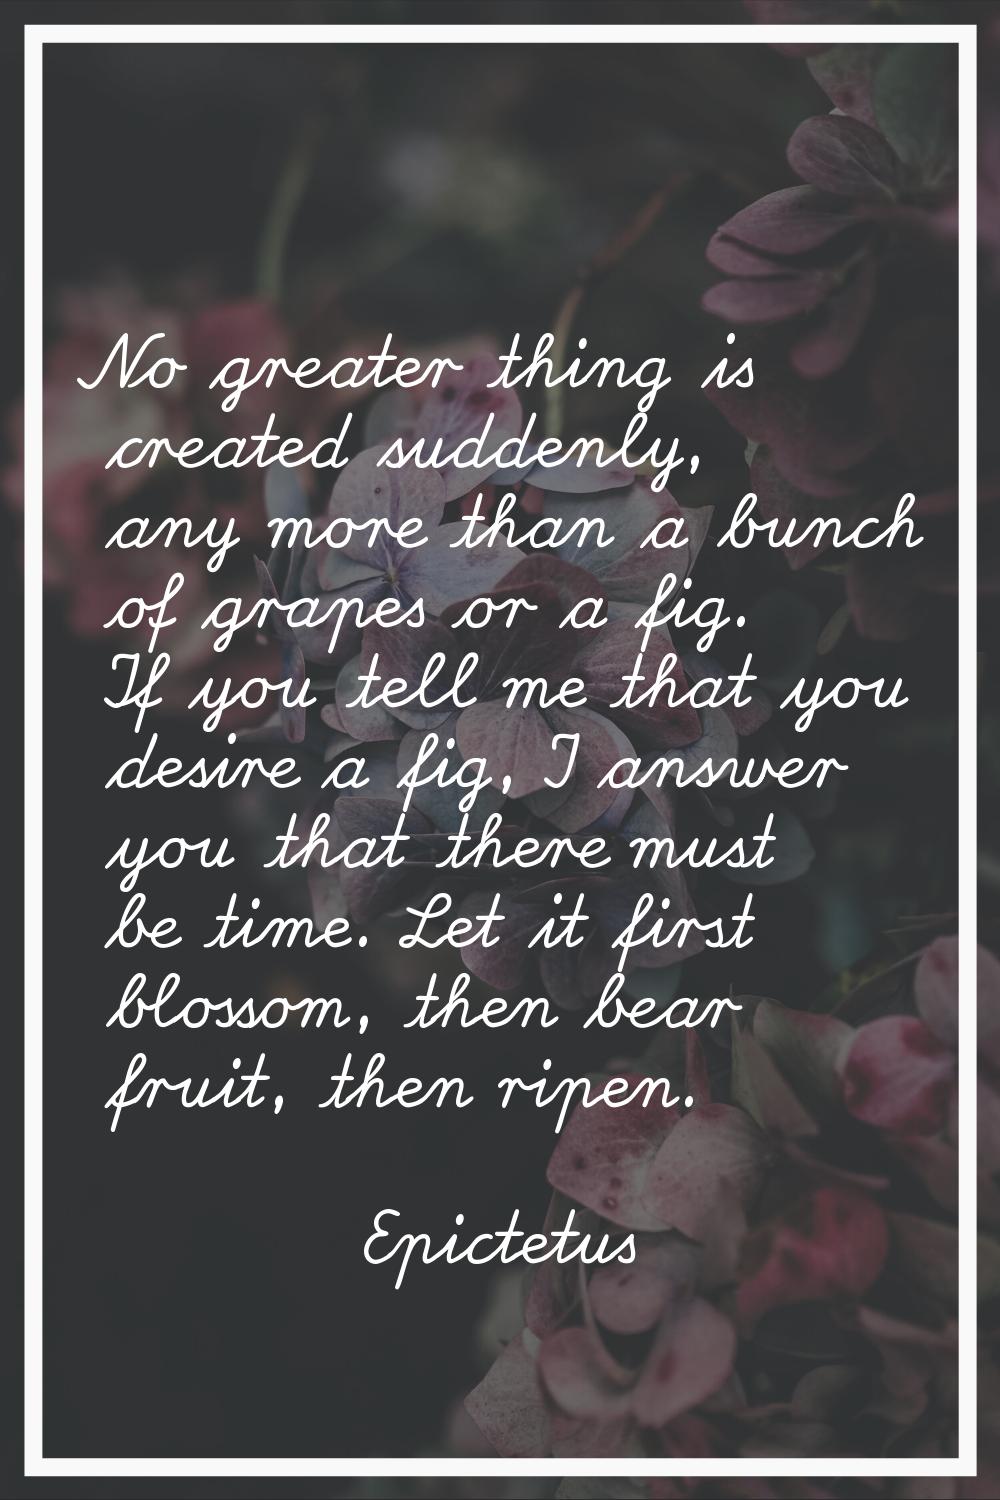 No greater thing is created suddenly, any more than a bunch of grapes or a fig. If you tell me that